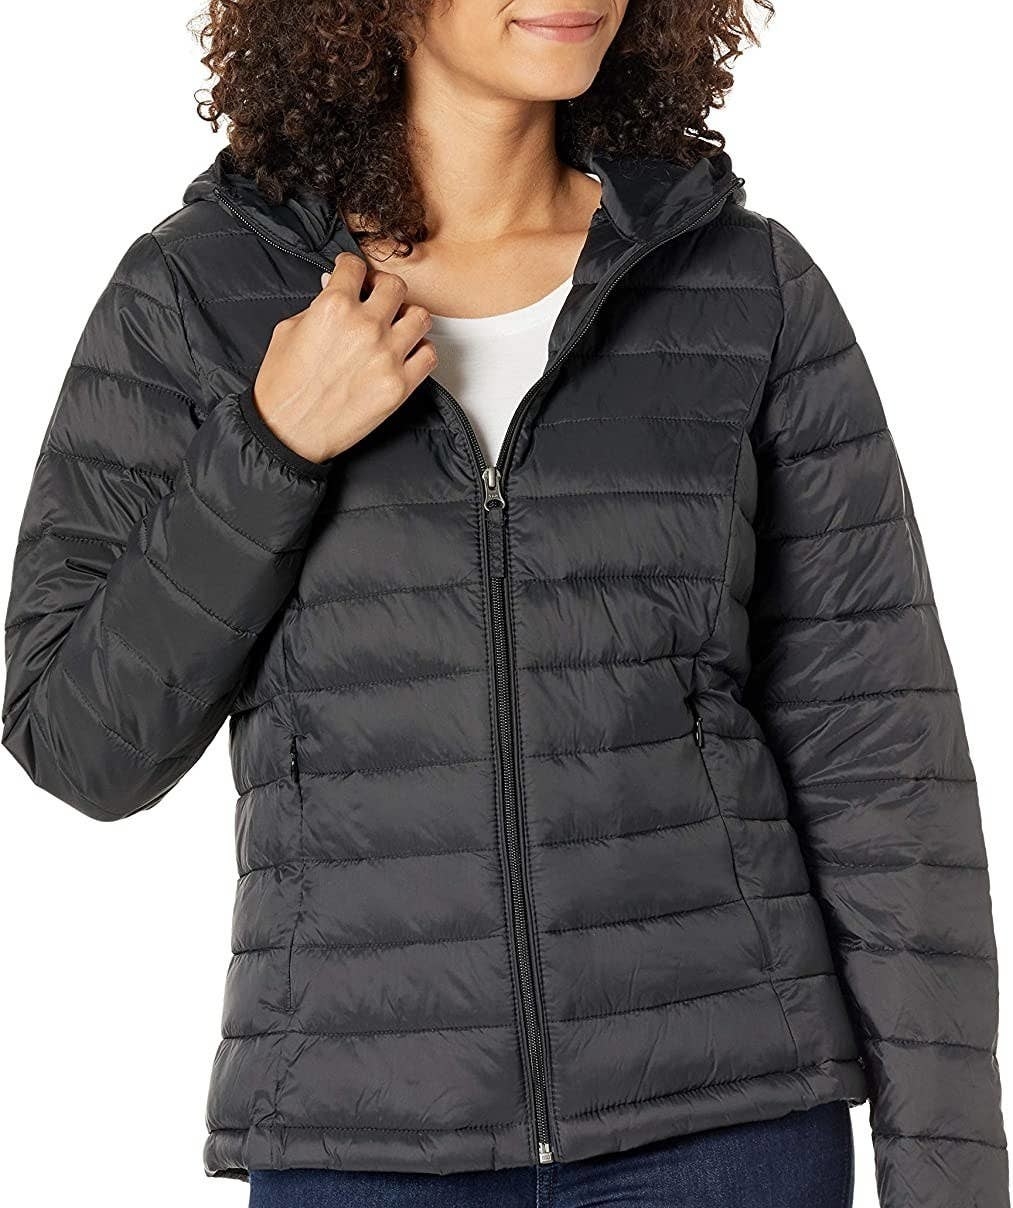 a person wearing the packable puffer jacker with jeans on a white background